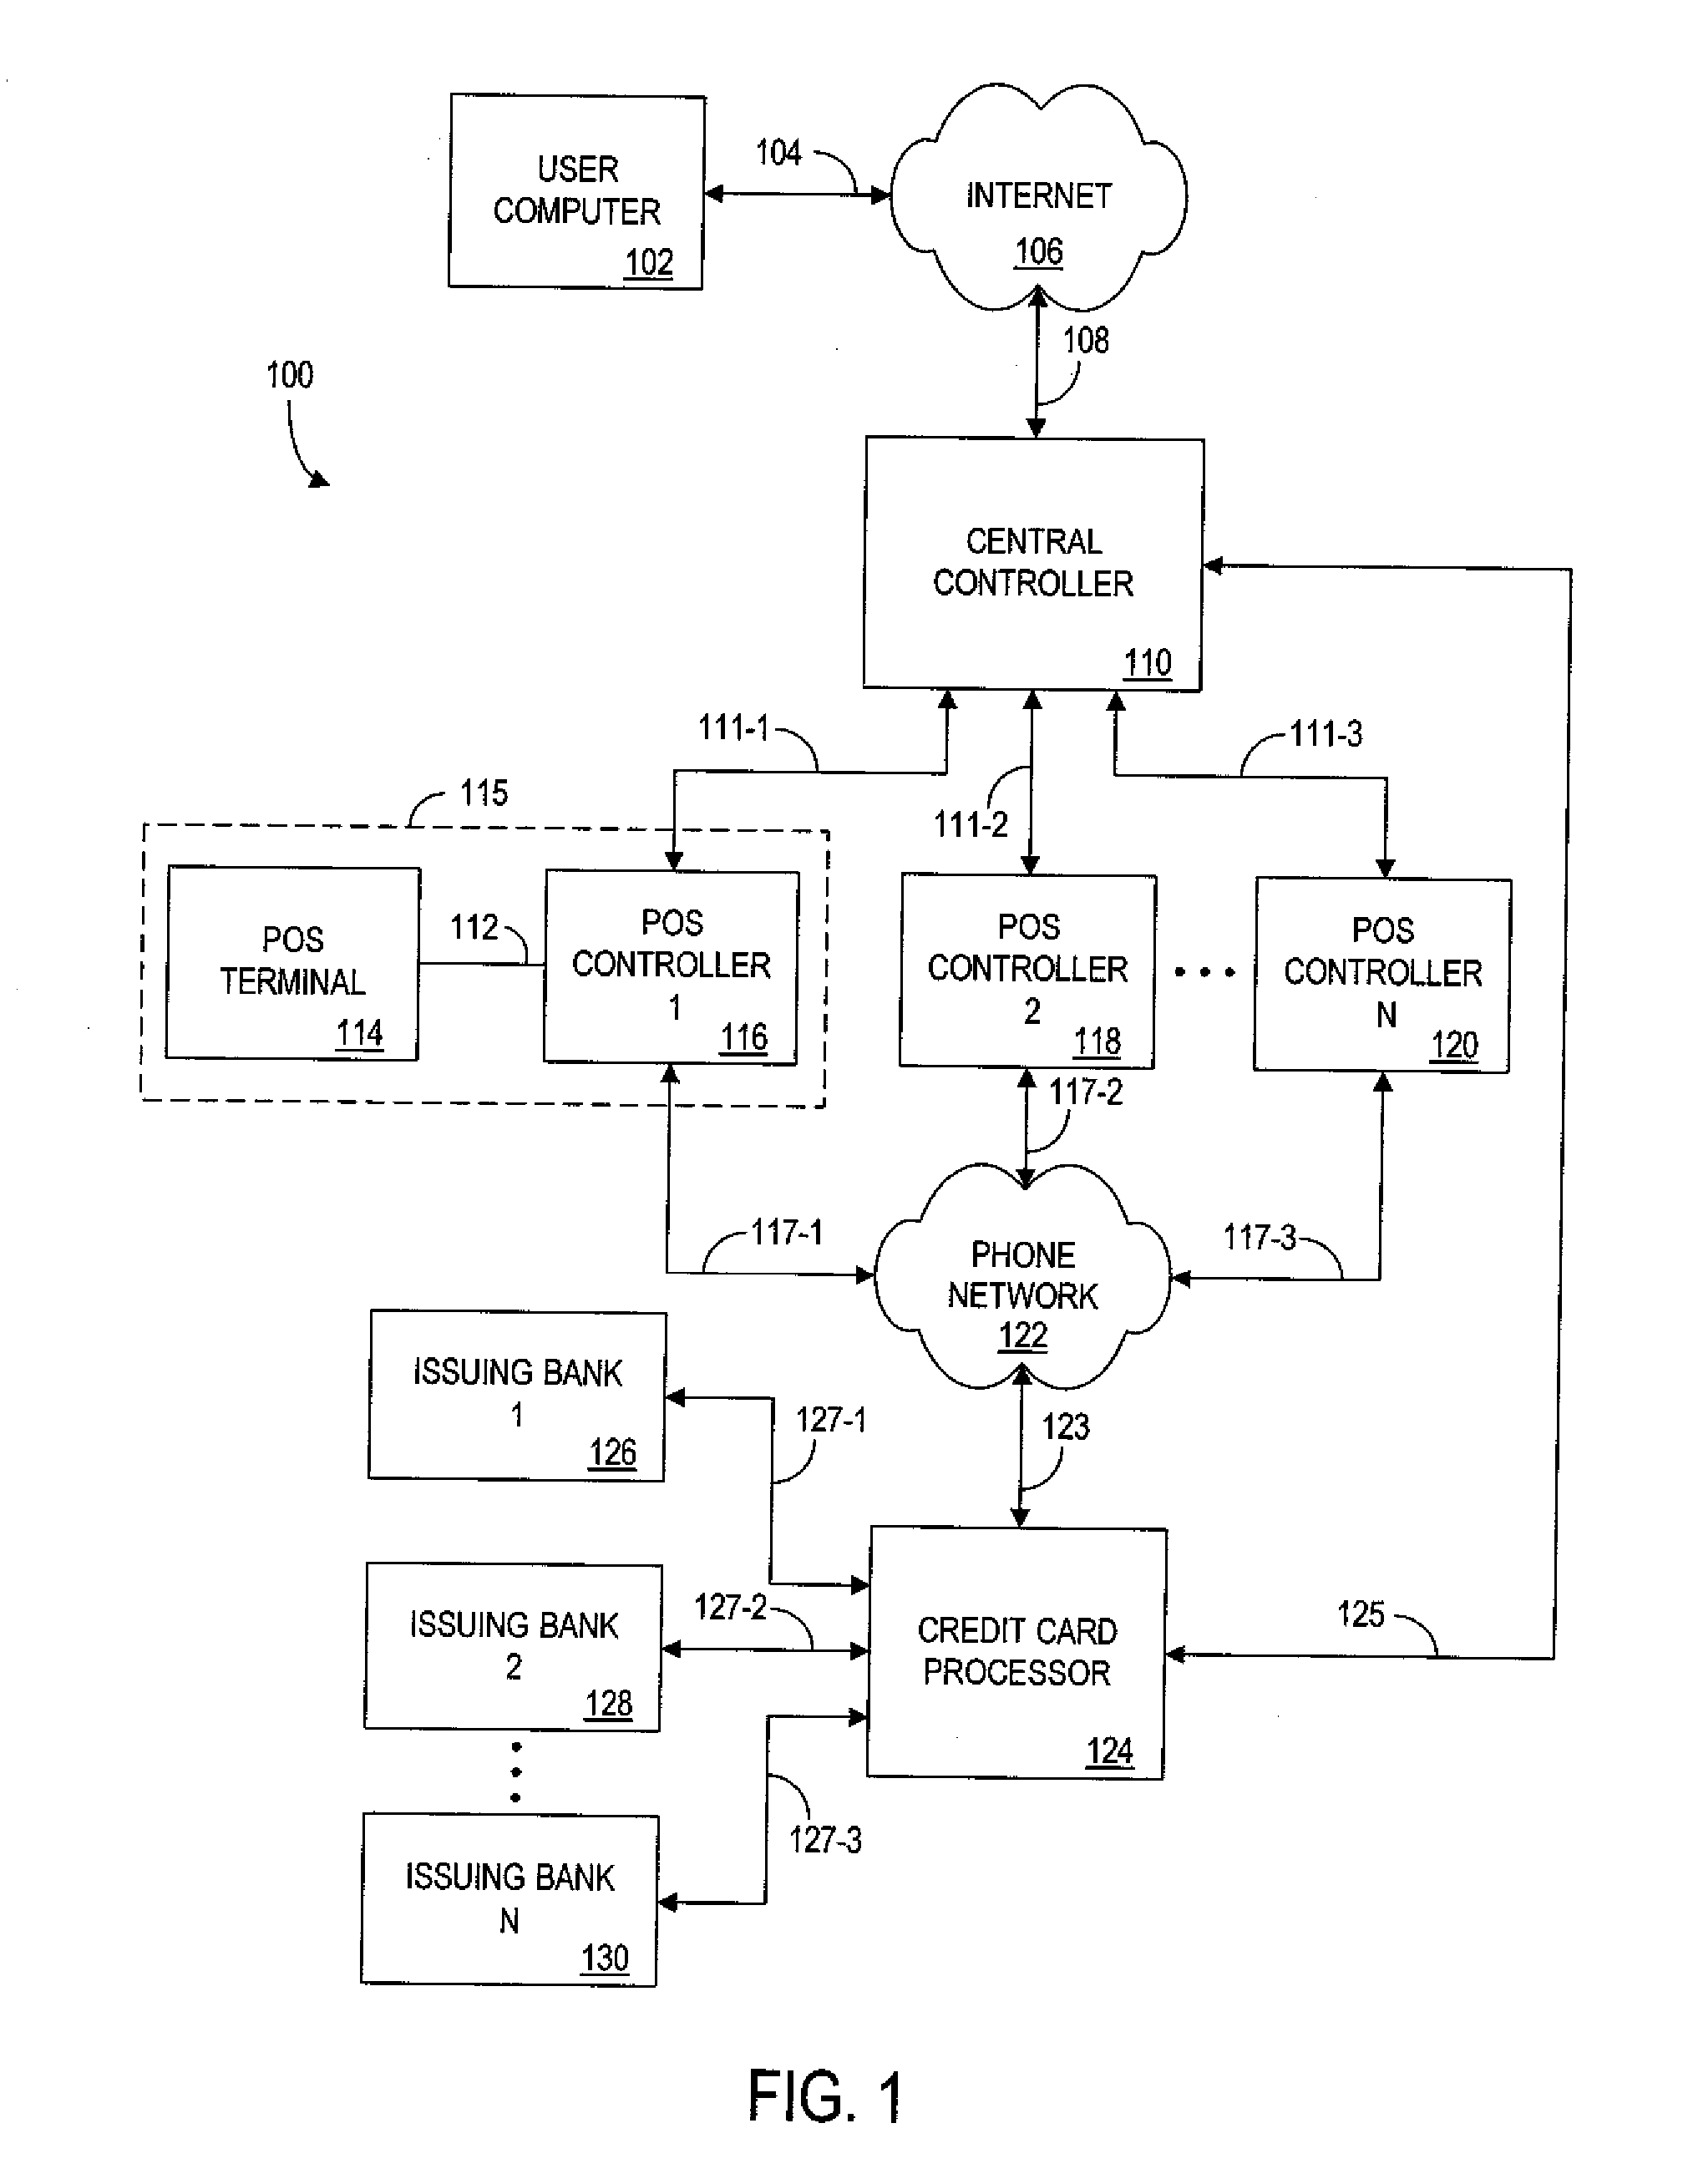 System and process for local acquisition of products priced online